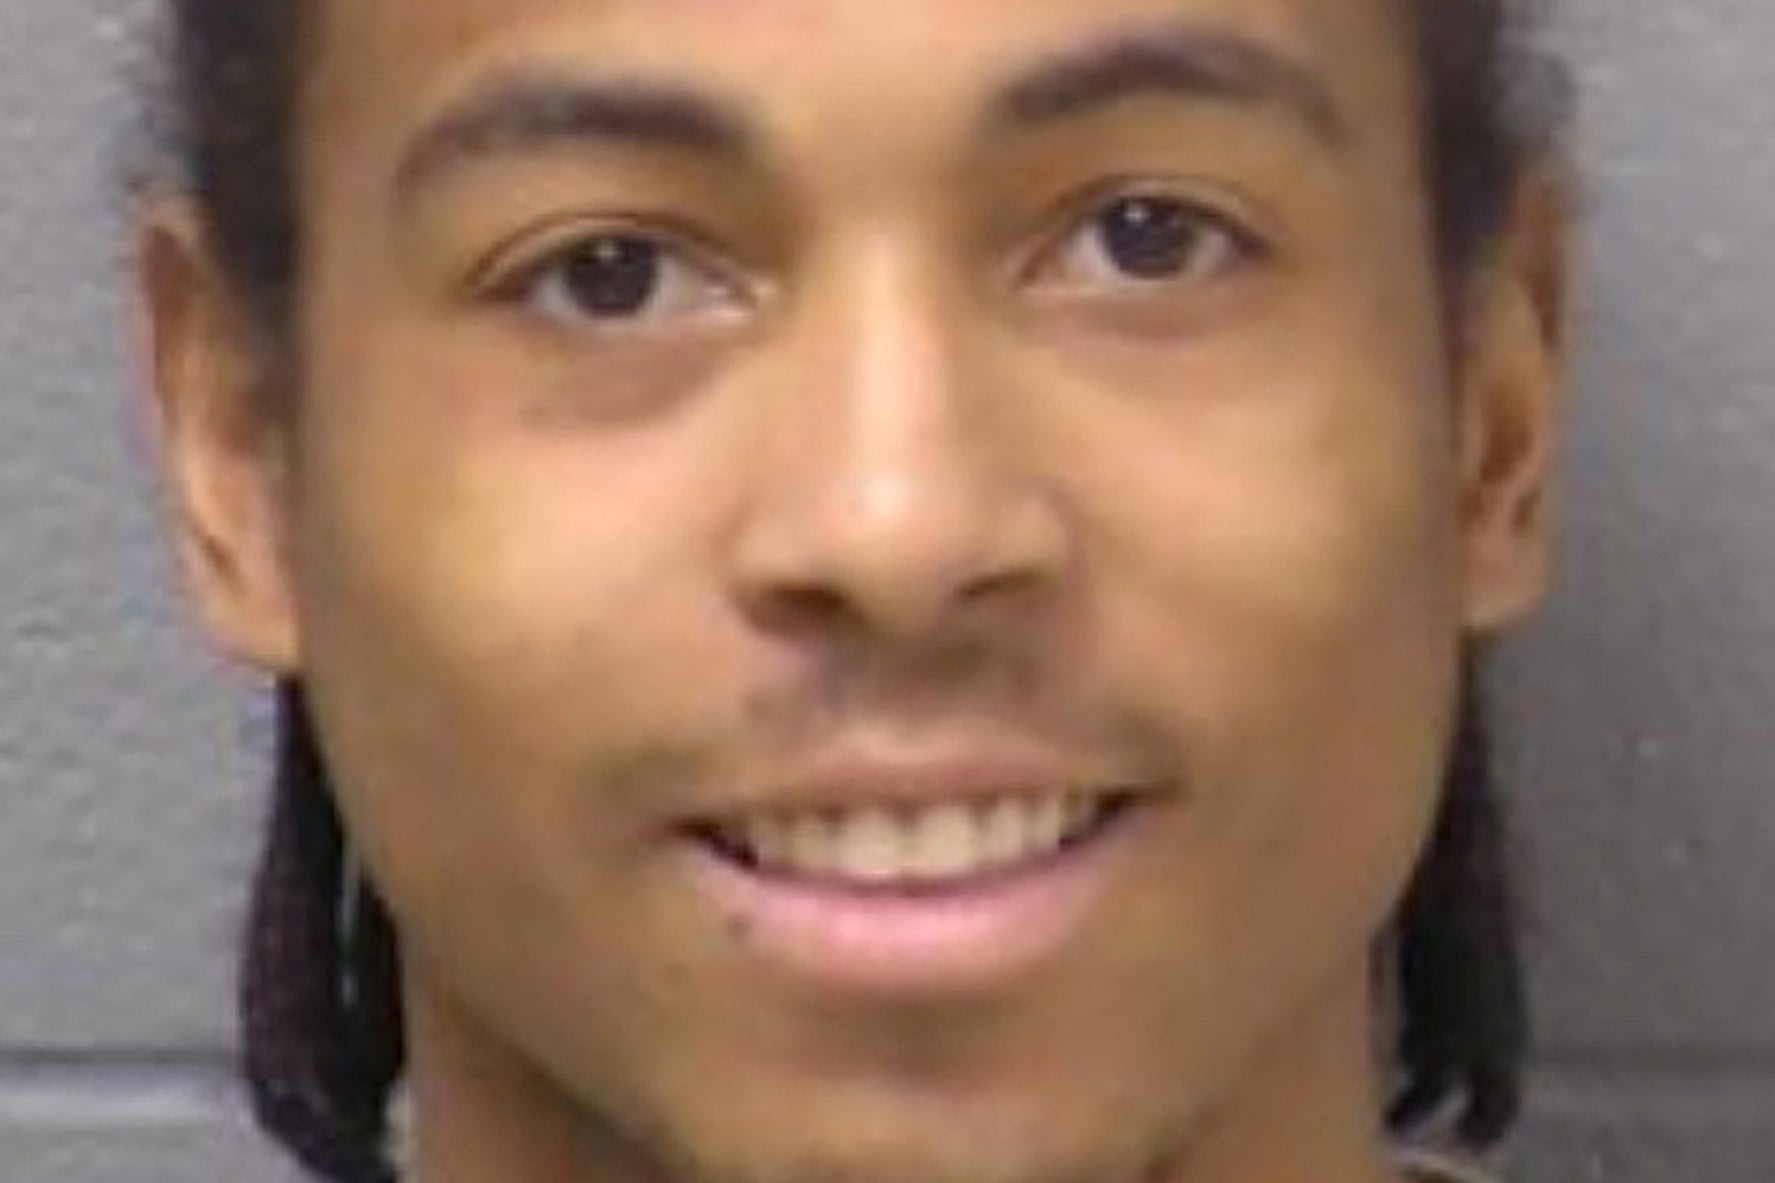 Romeo Nance is believed to have killed eight people in Chicago